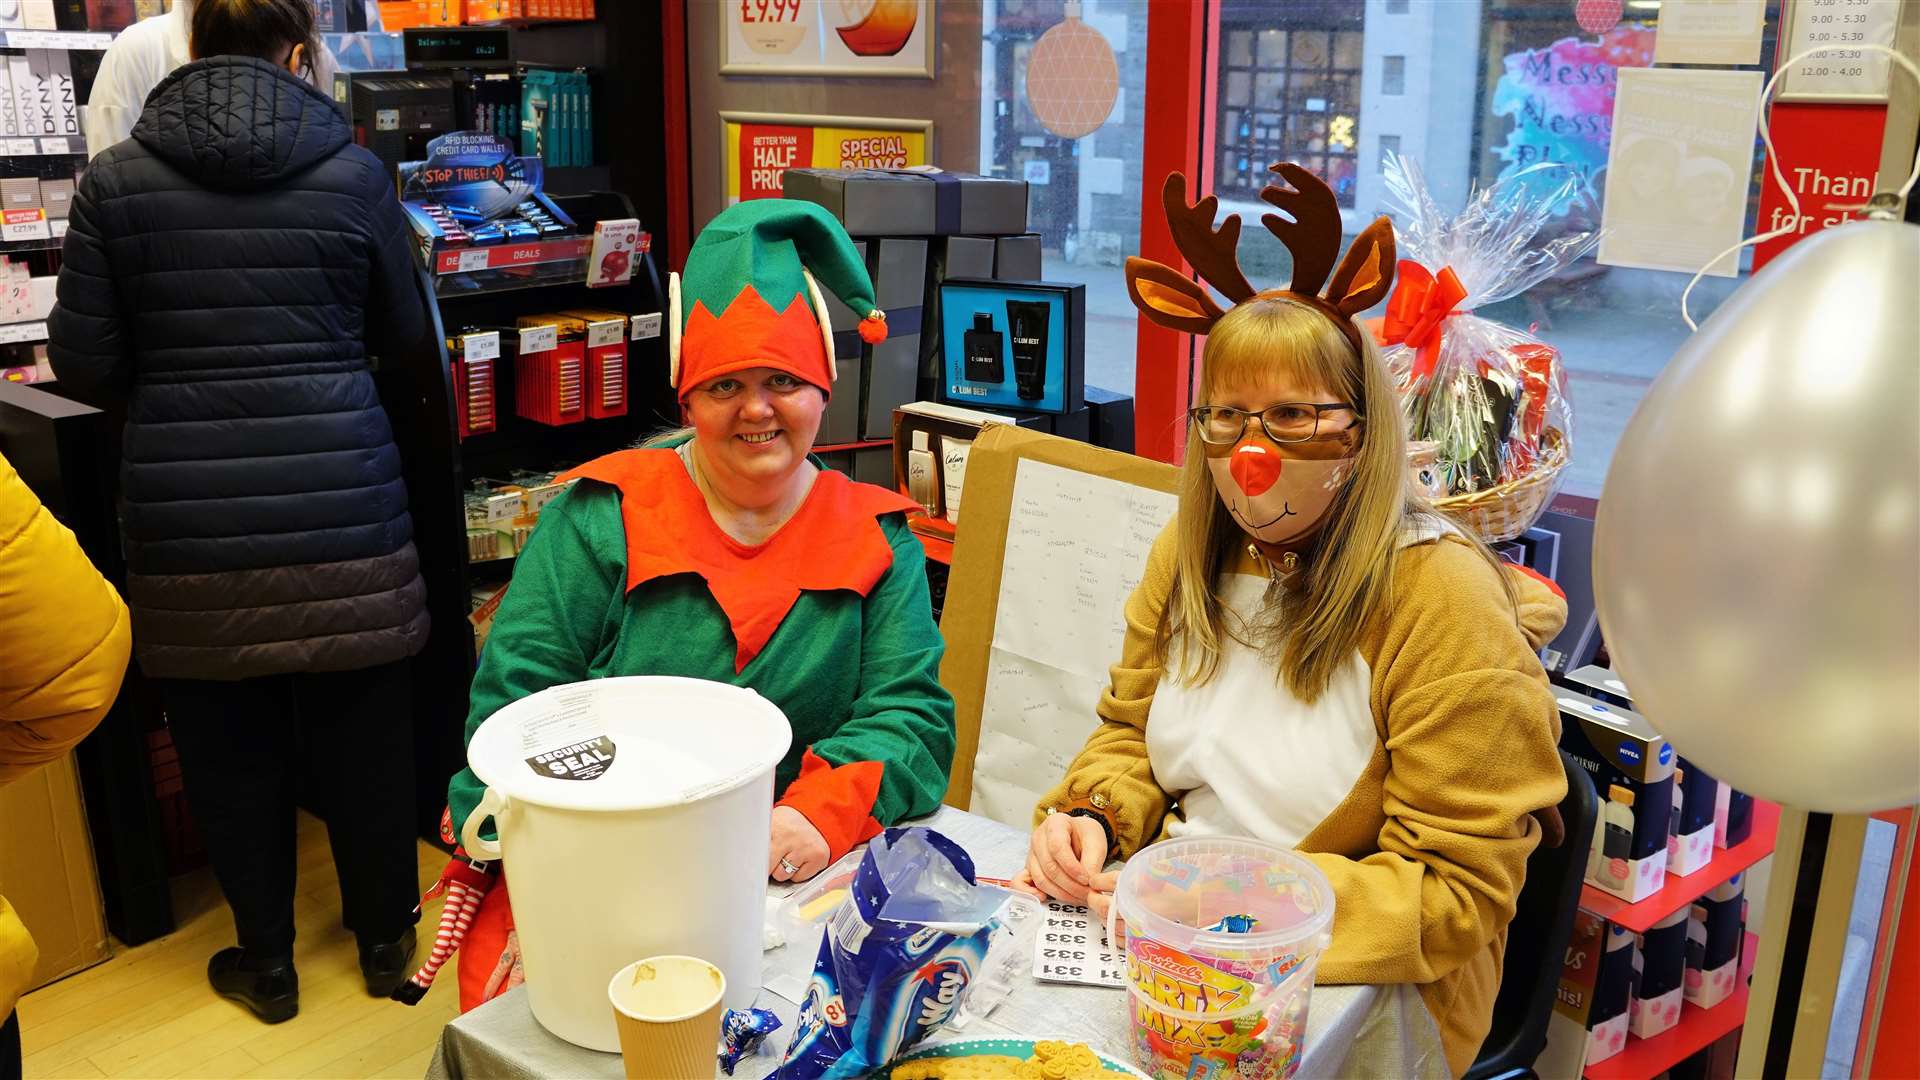 Gillian Galbraith, left, and Lyndsay Dunnett were doing a raffle with prizes of hampers at Semichem in Thurso. Picture: DGS